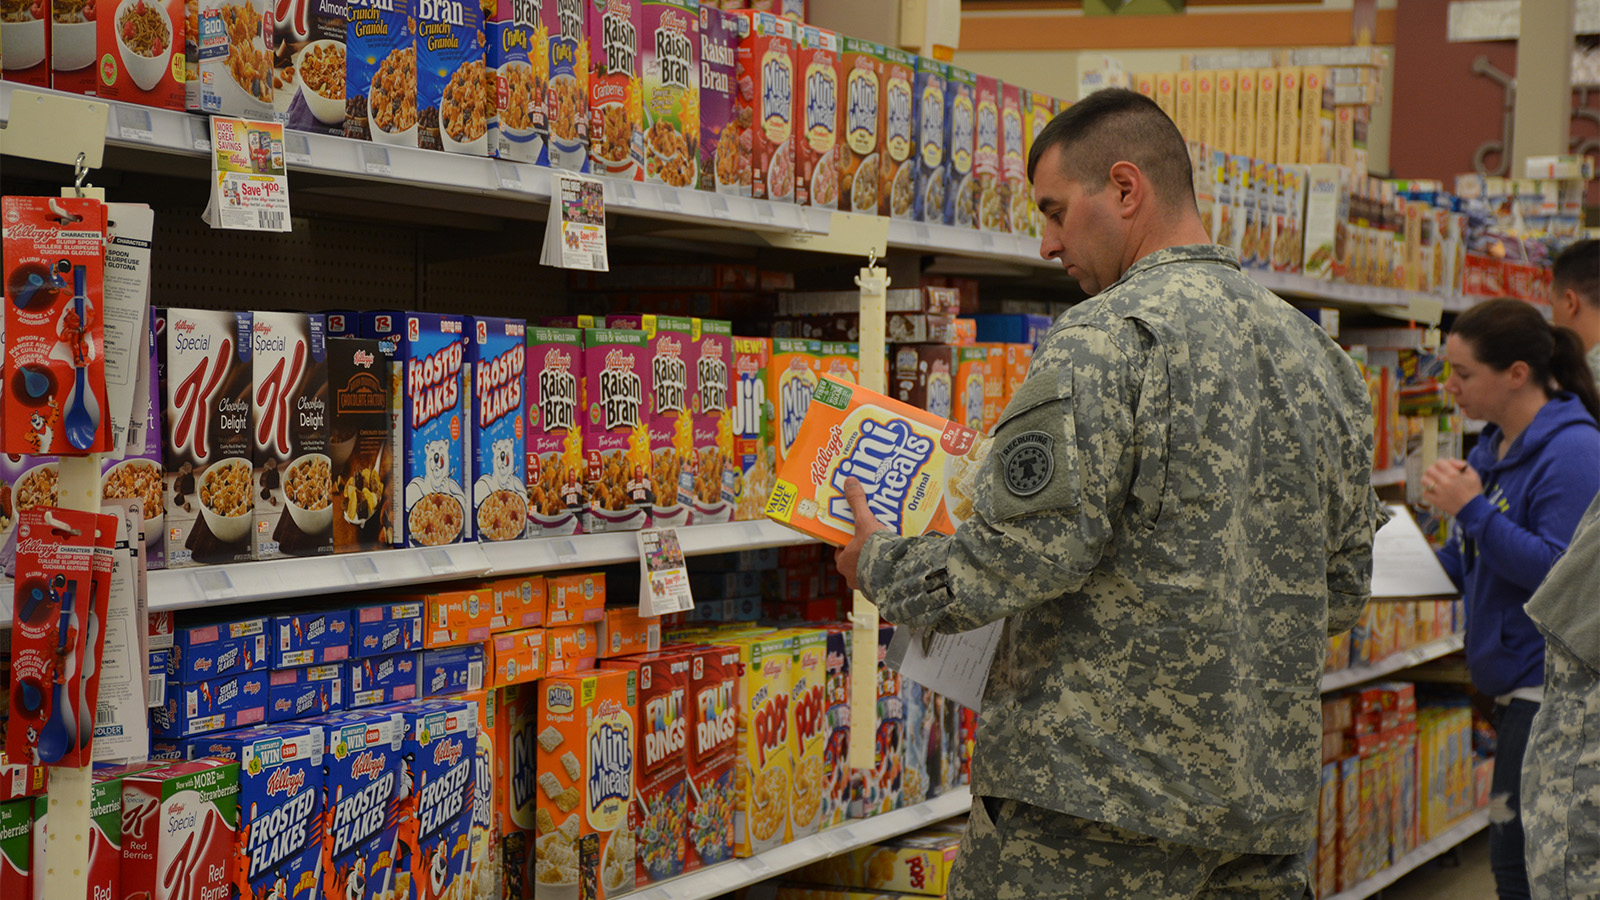 Service member holding a box of cereal in a grocery store.